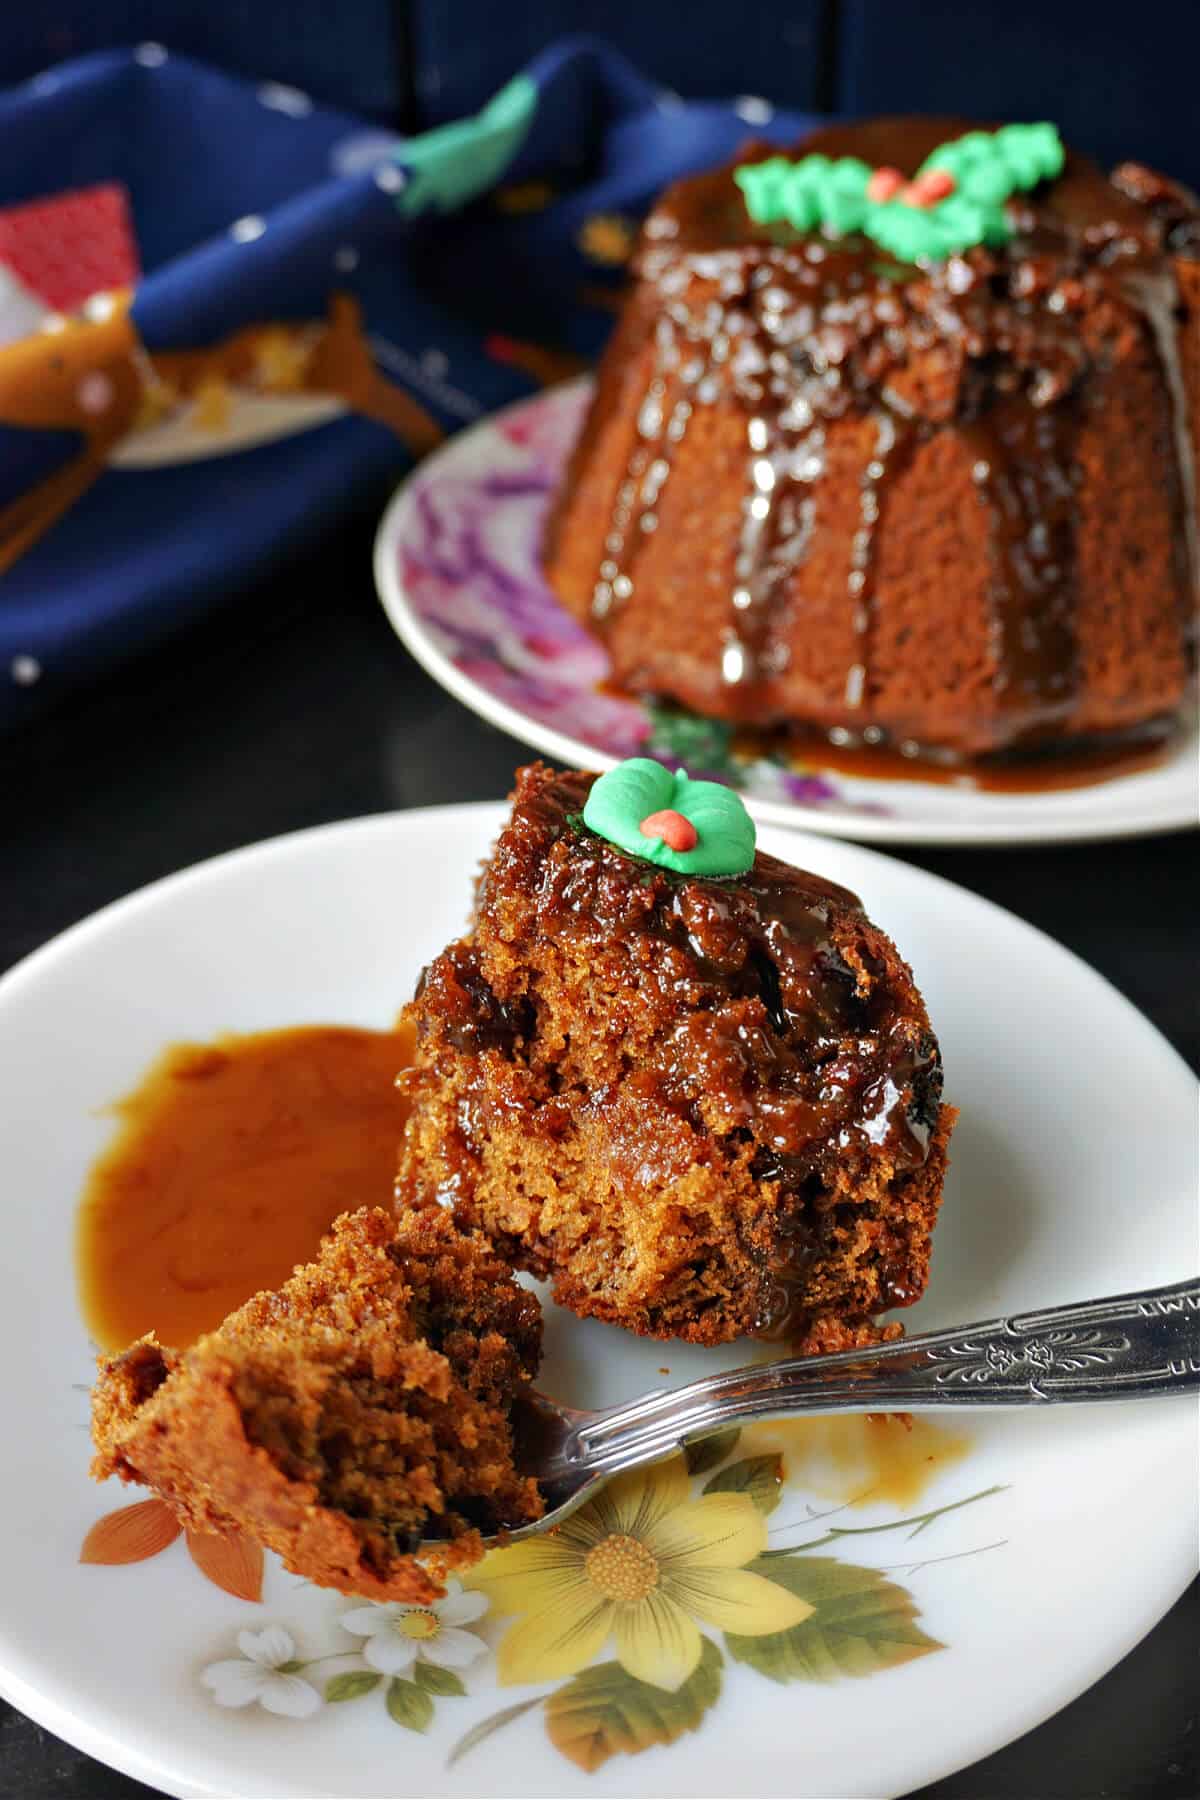 A portion of sticky toffee pudding with more Christmas pudding in the background.